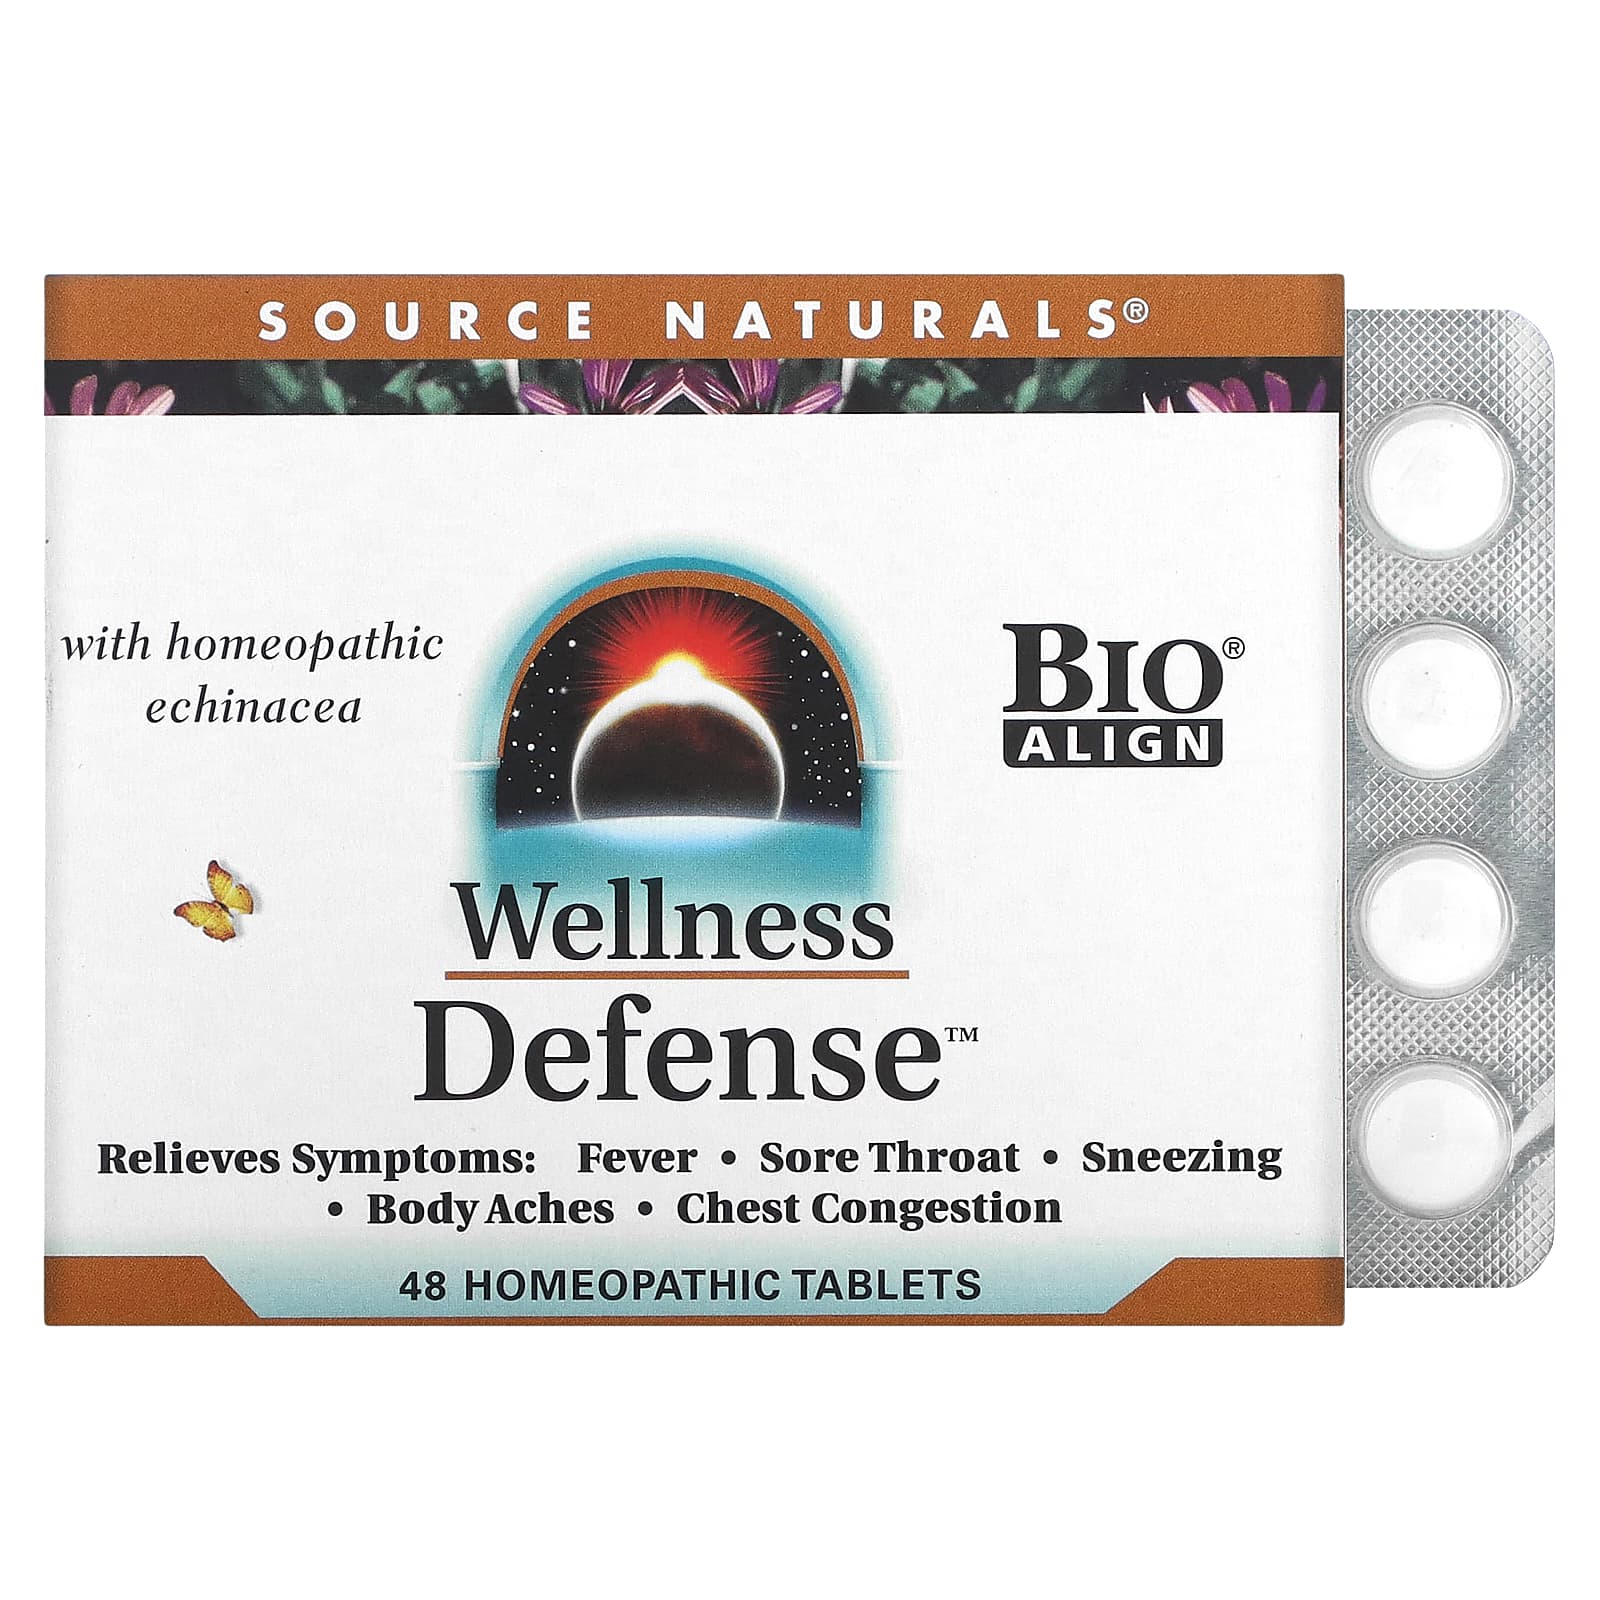 Source Naturals Wellness Defense 48 Homeopathic Tablets